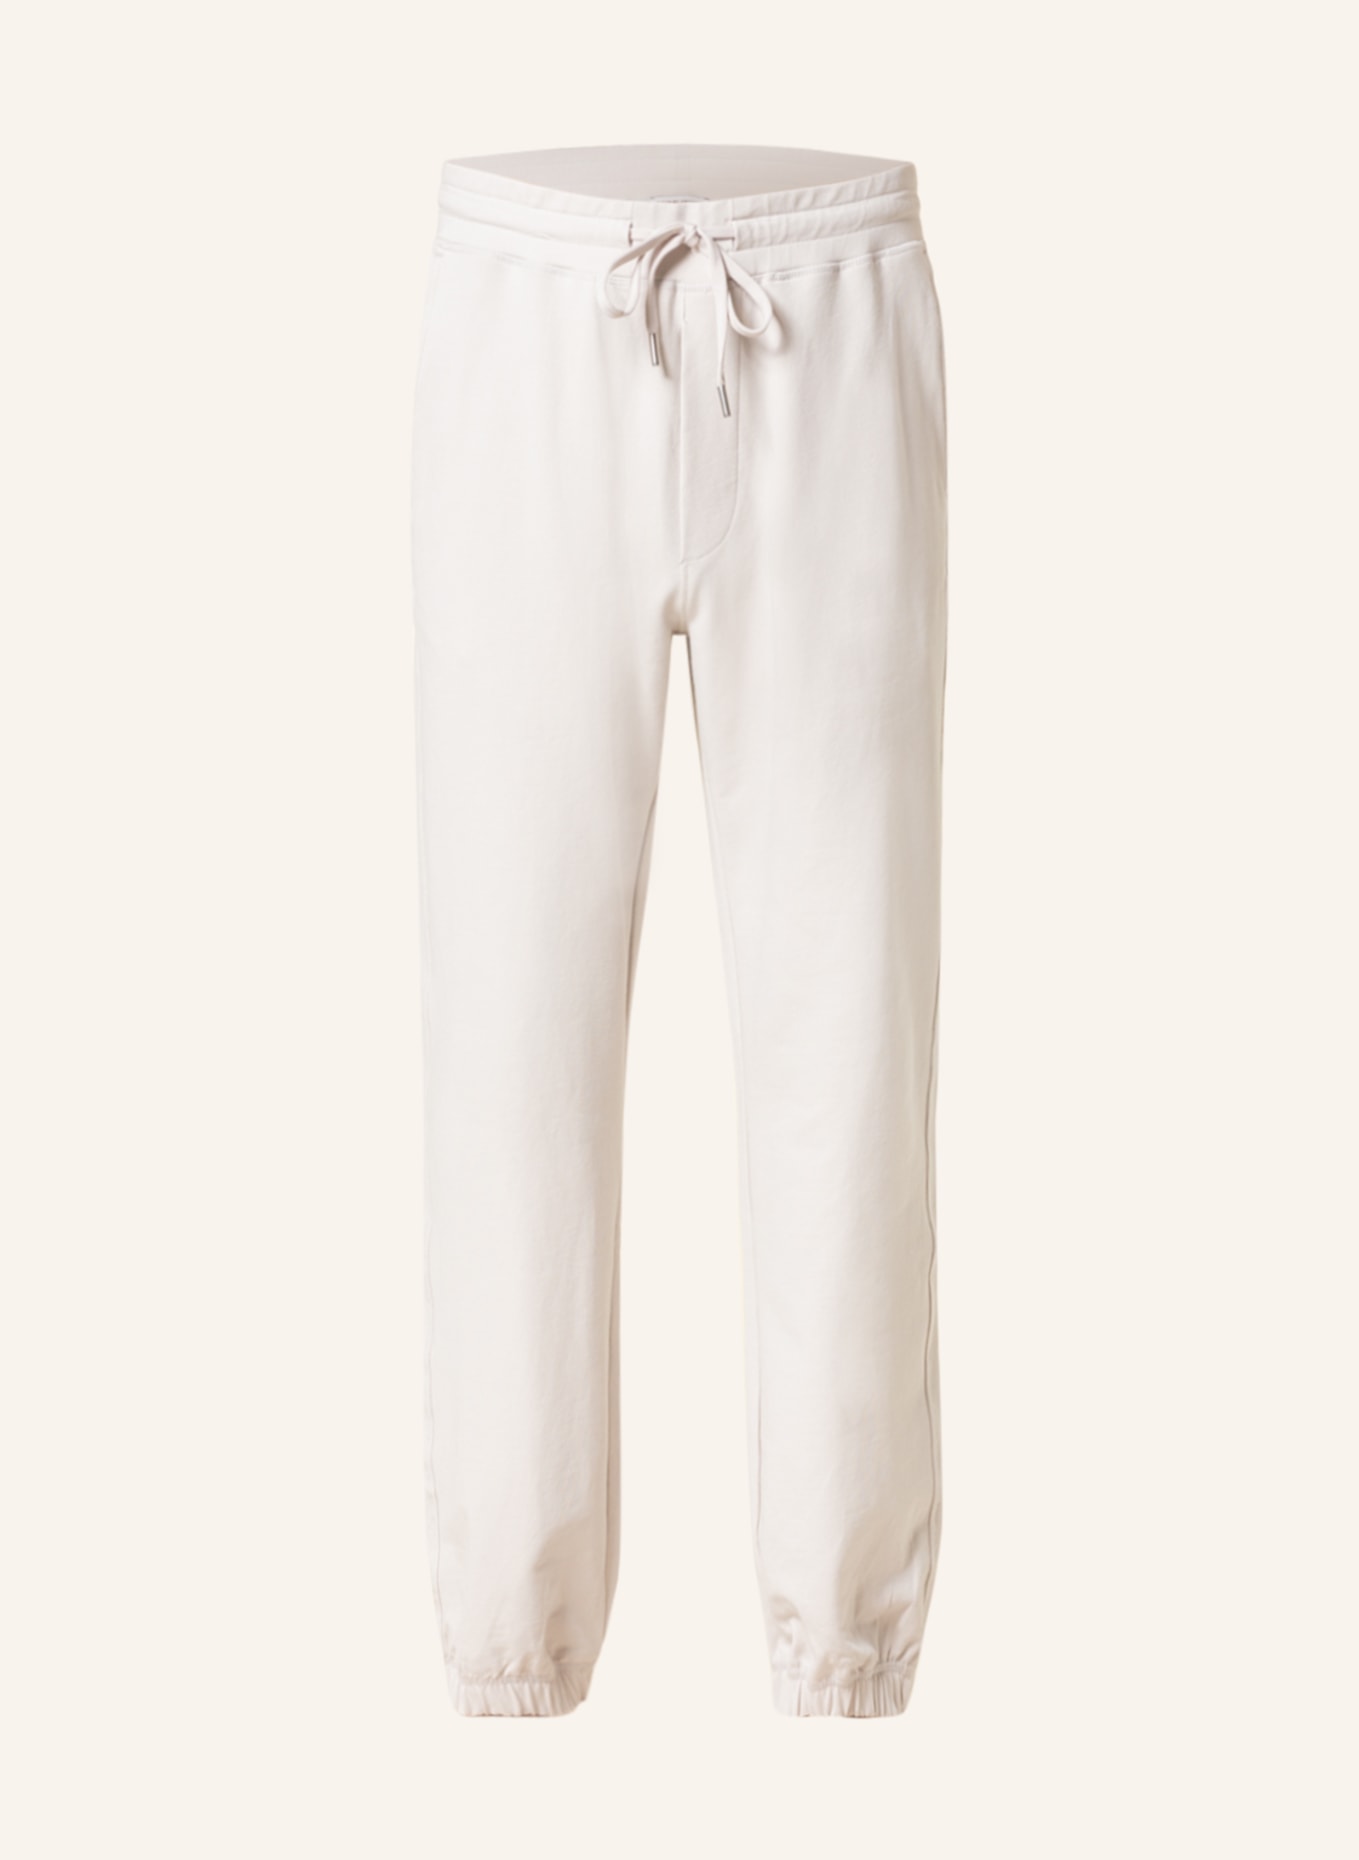 TIGER OF SWEDEN Trousers CASON in jogger style, Color: LIGHT GRAY (Image 1)